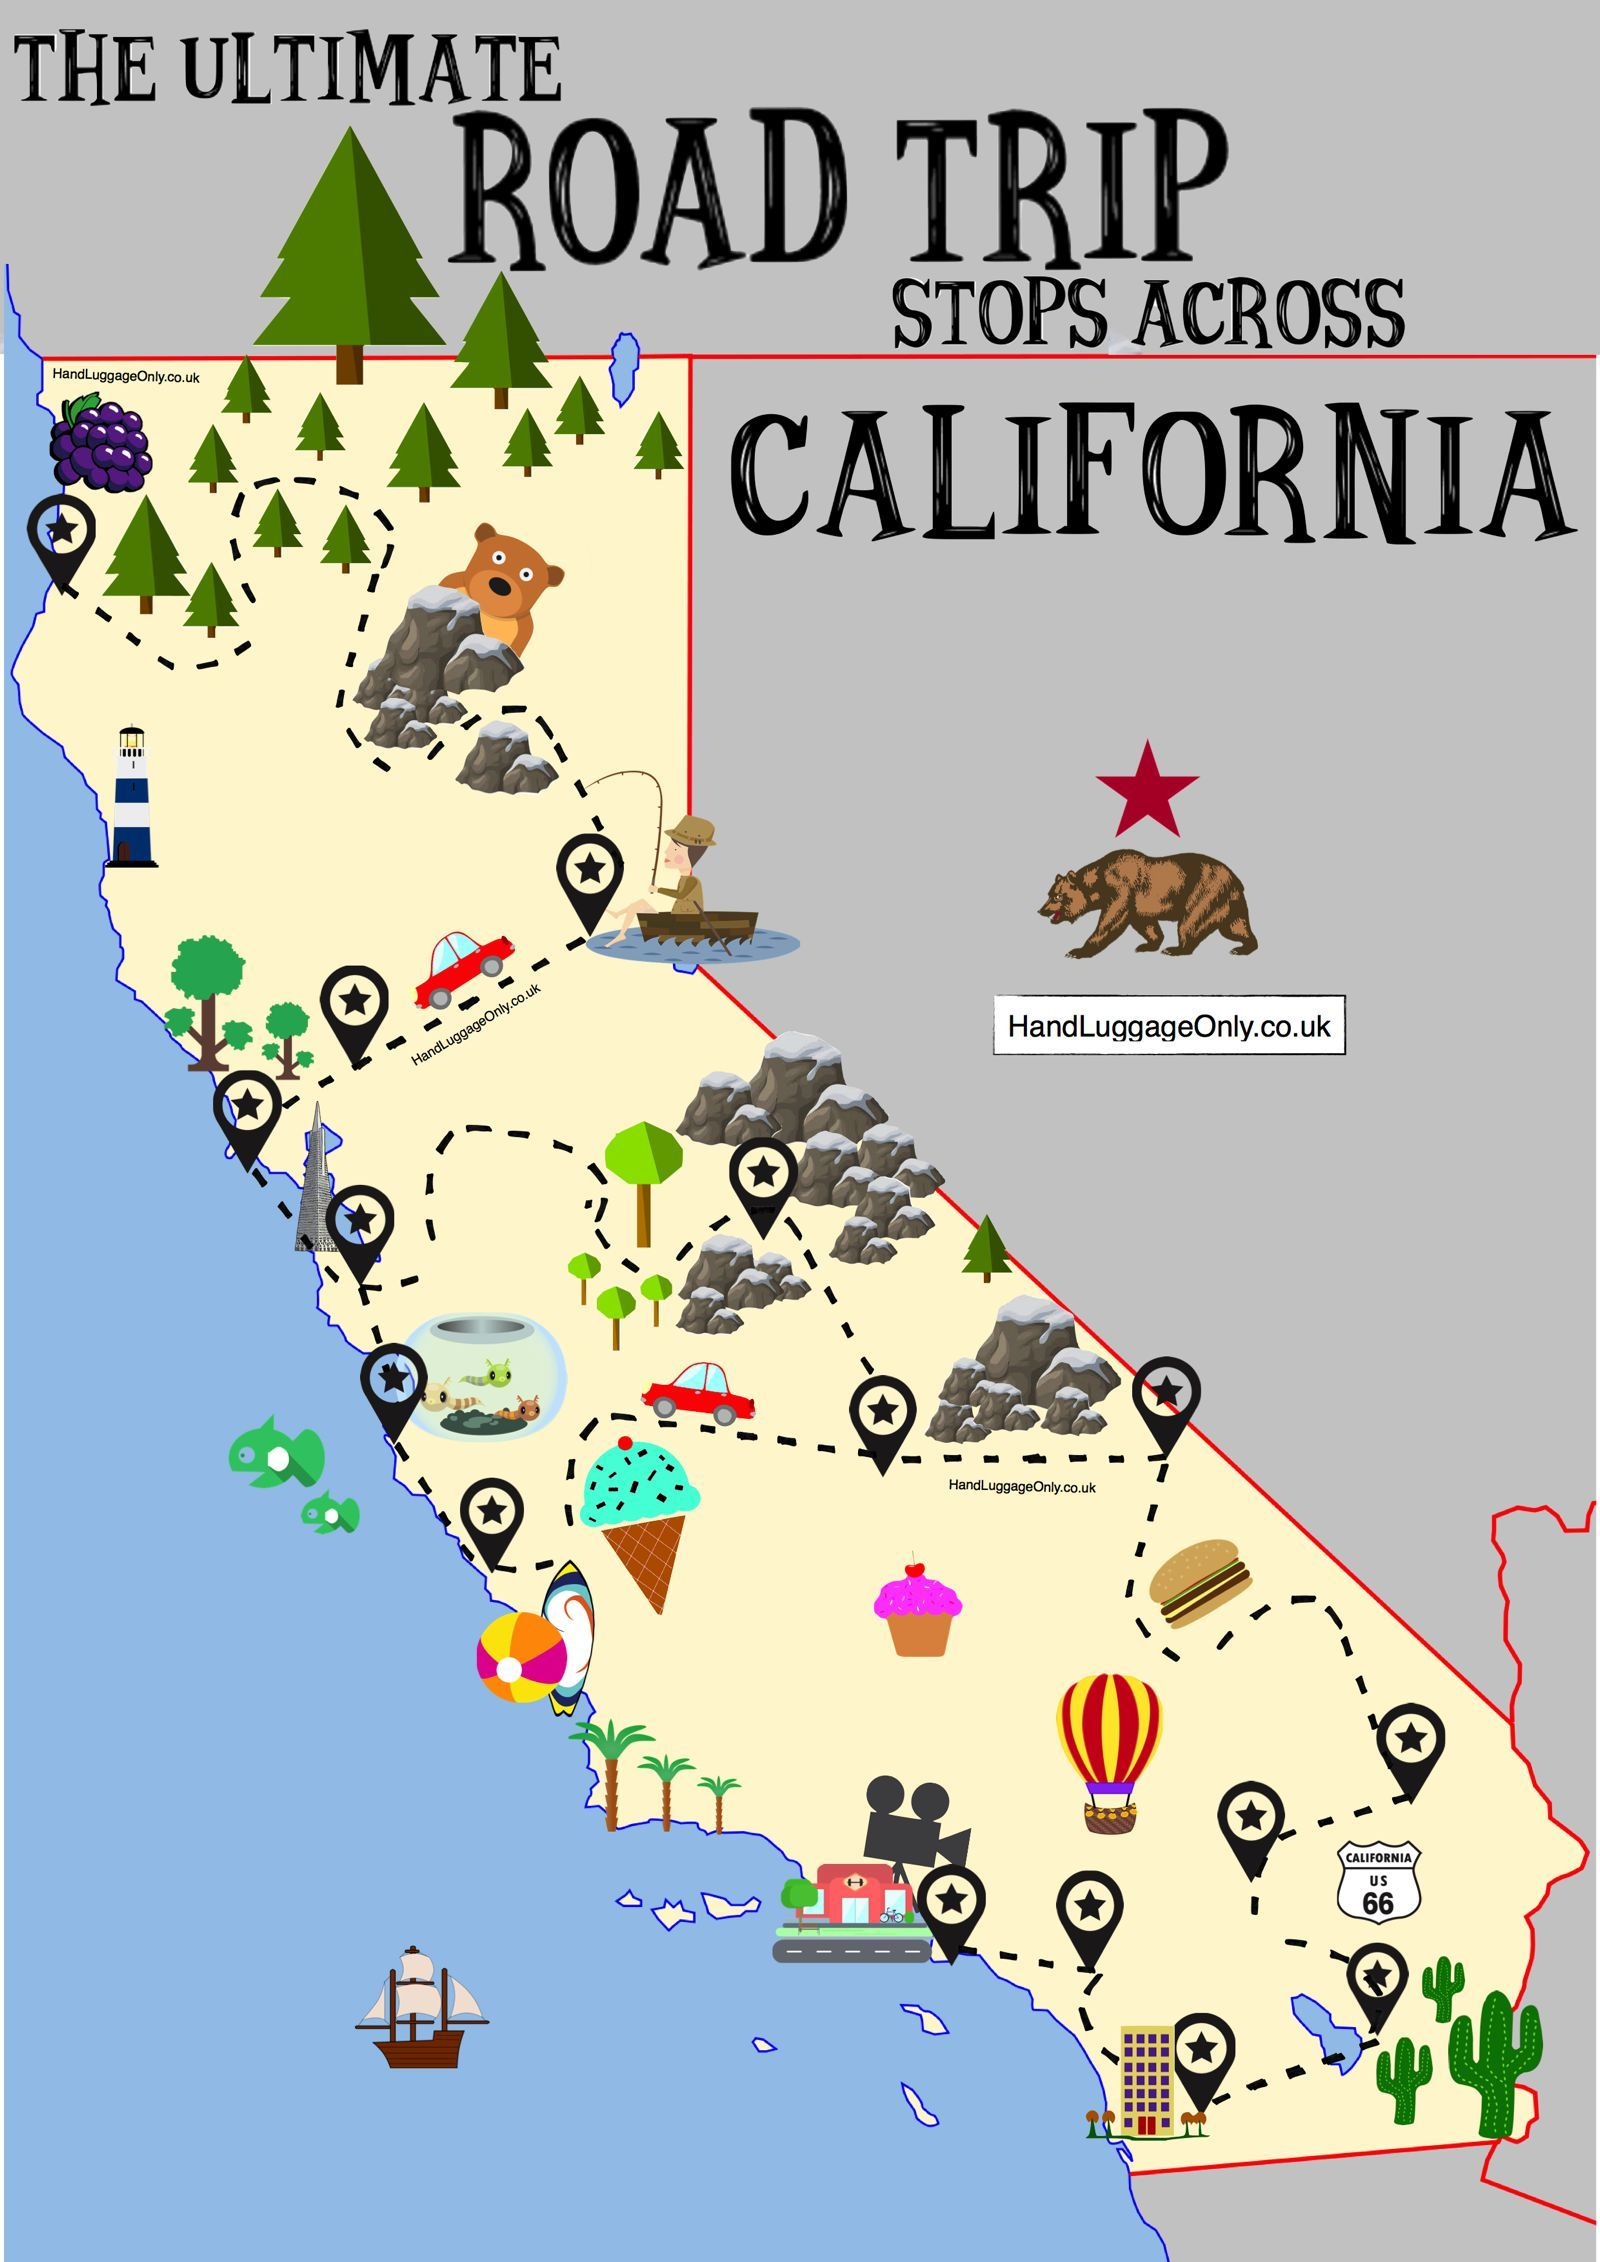 The Ultimate Road Trip Map Of Places To Visit In California | Travel - Southern California Attractions Map